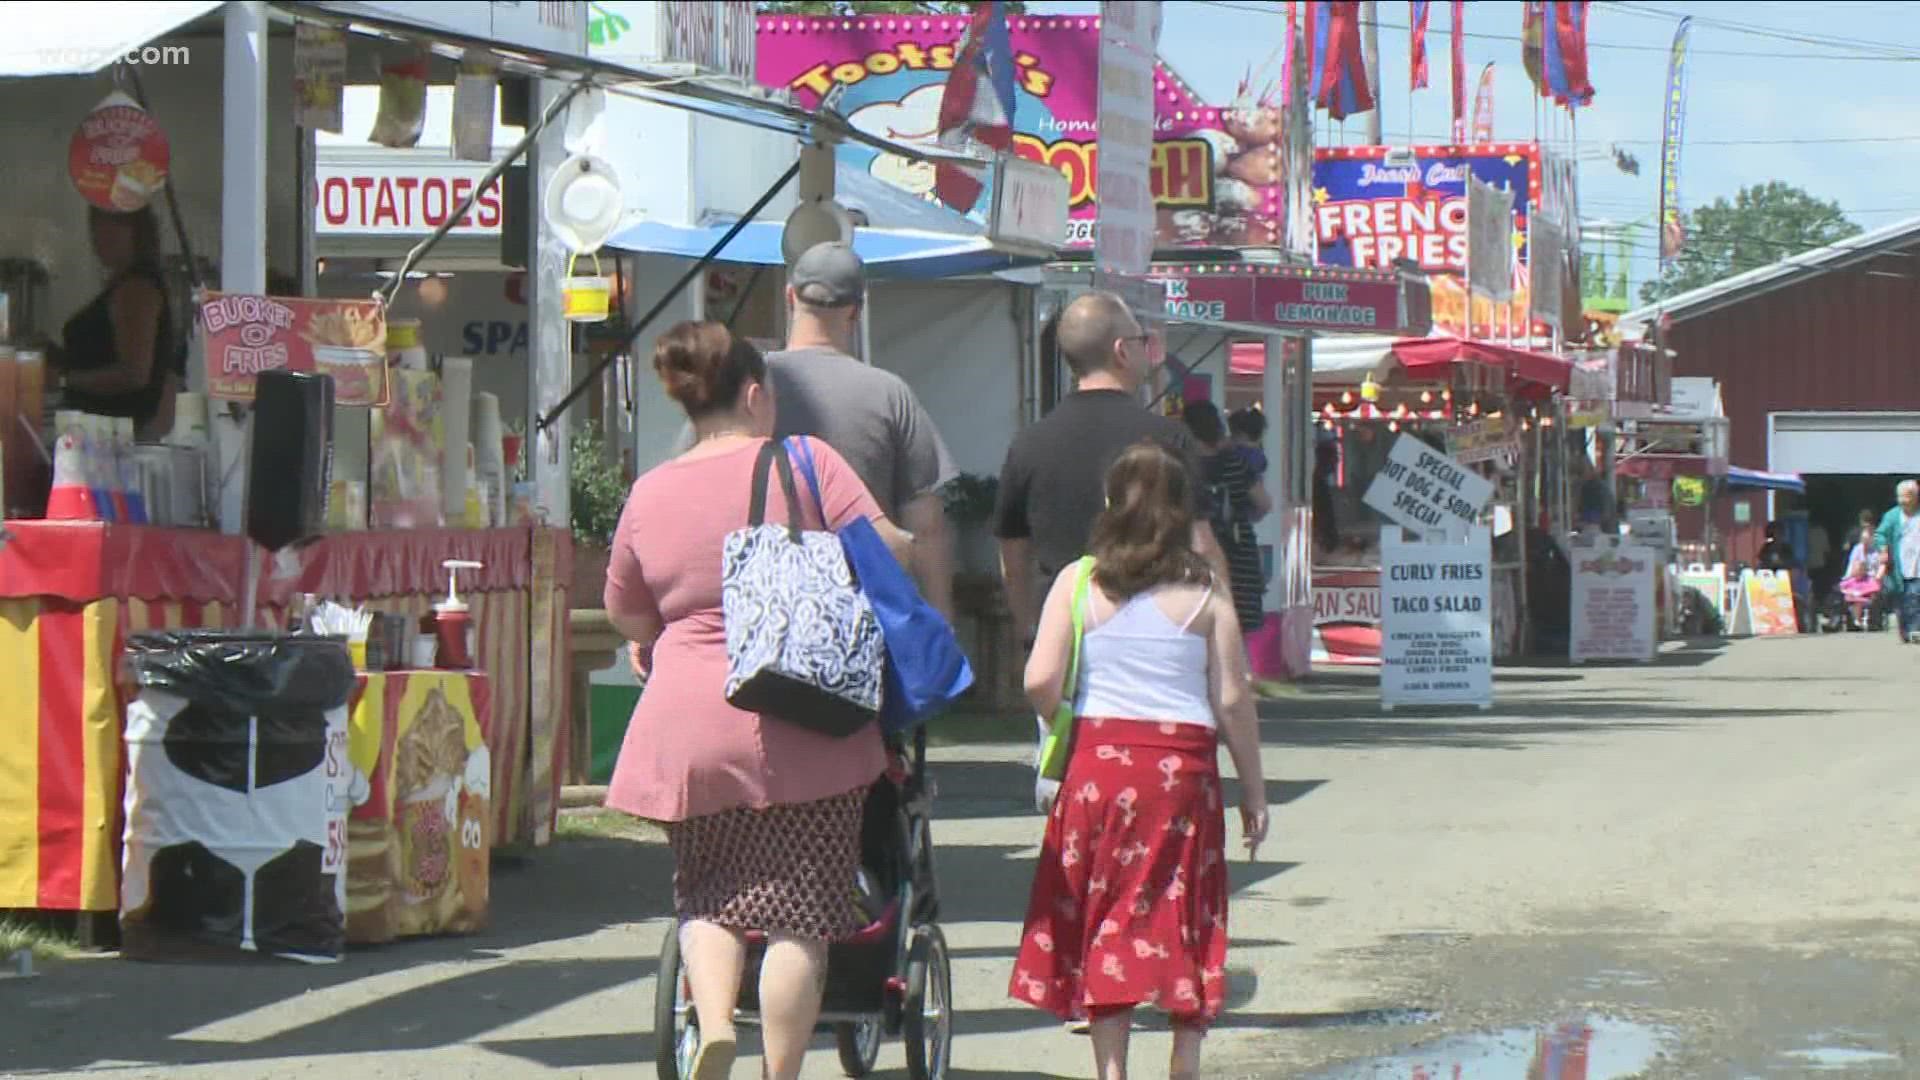 If you want to get outside and enjoy the weather, the Chautauqua County Fair is back after two years off.